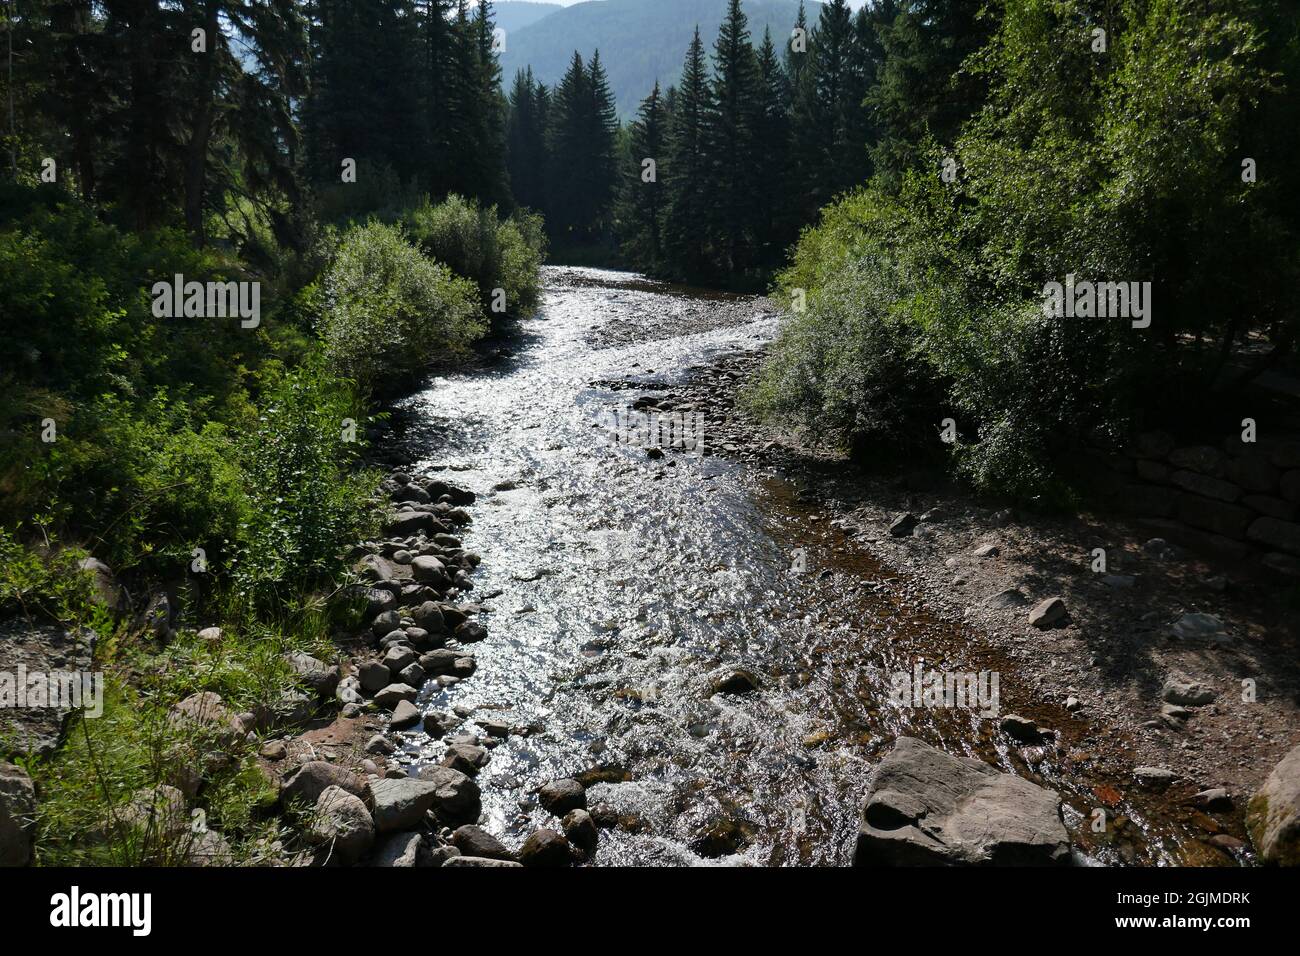 Beautiful mountain natural scenery with large creek flowing through Stock Photo